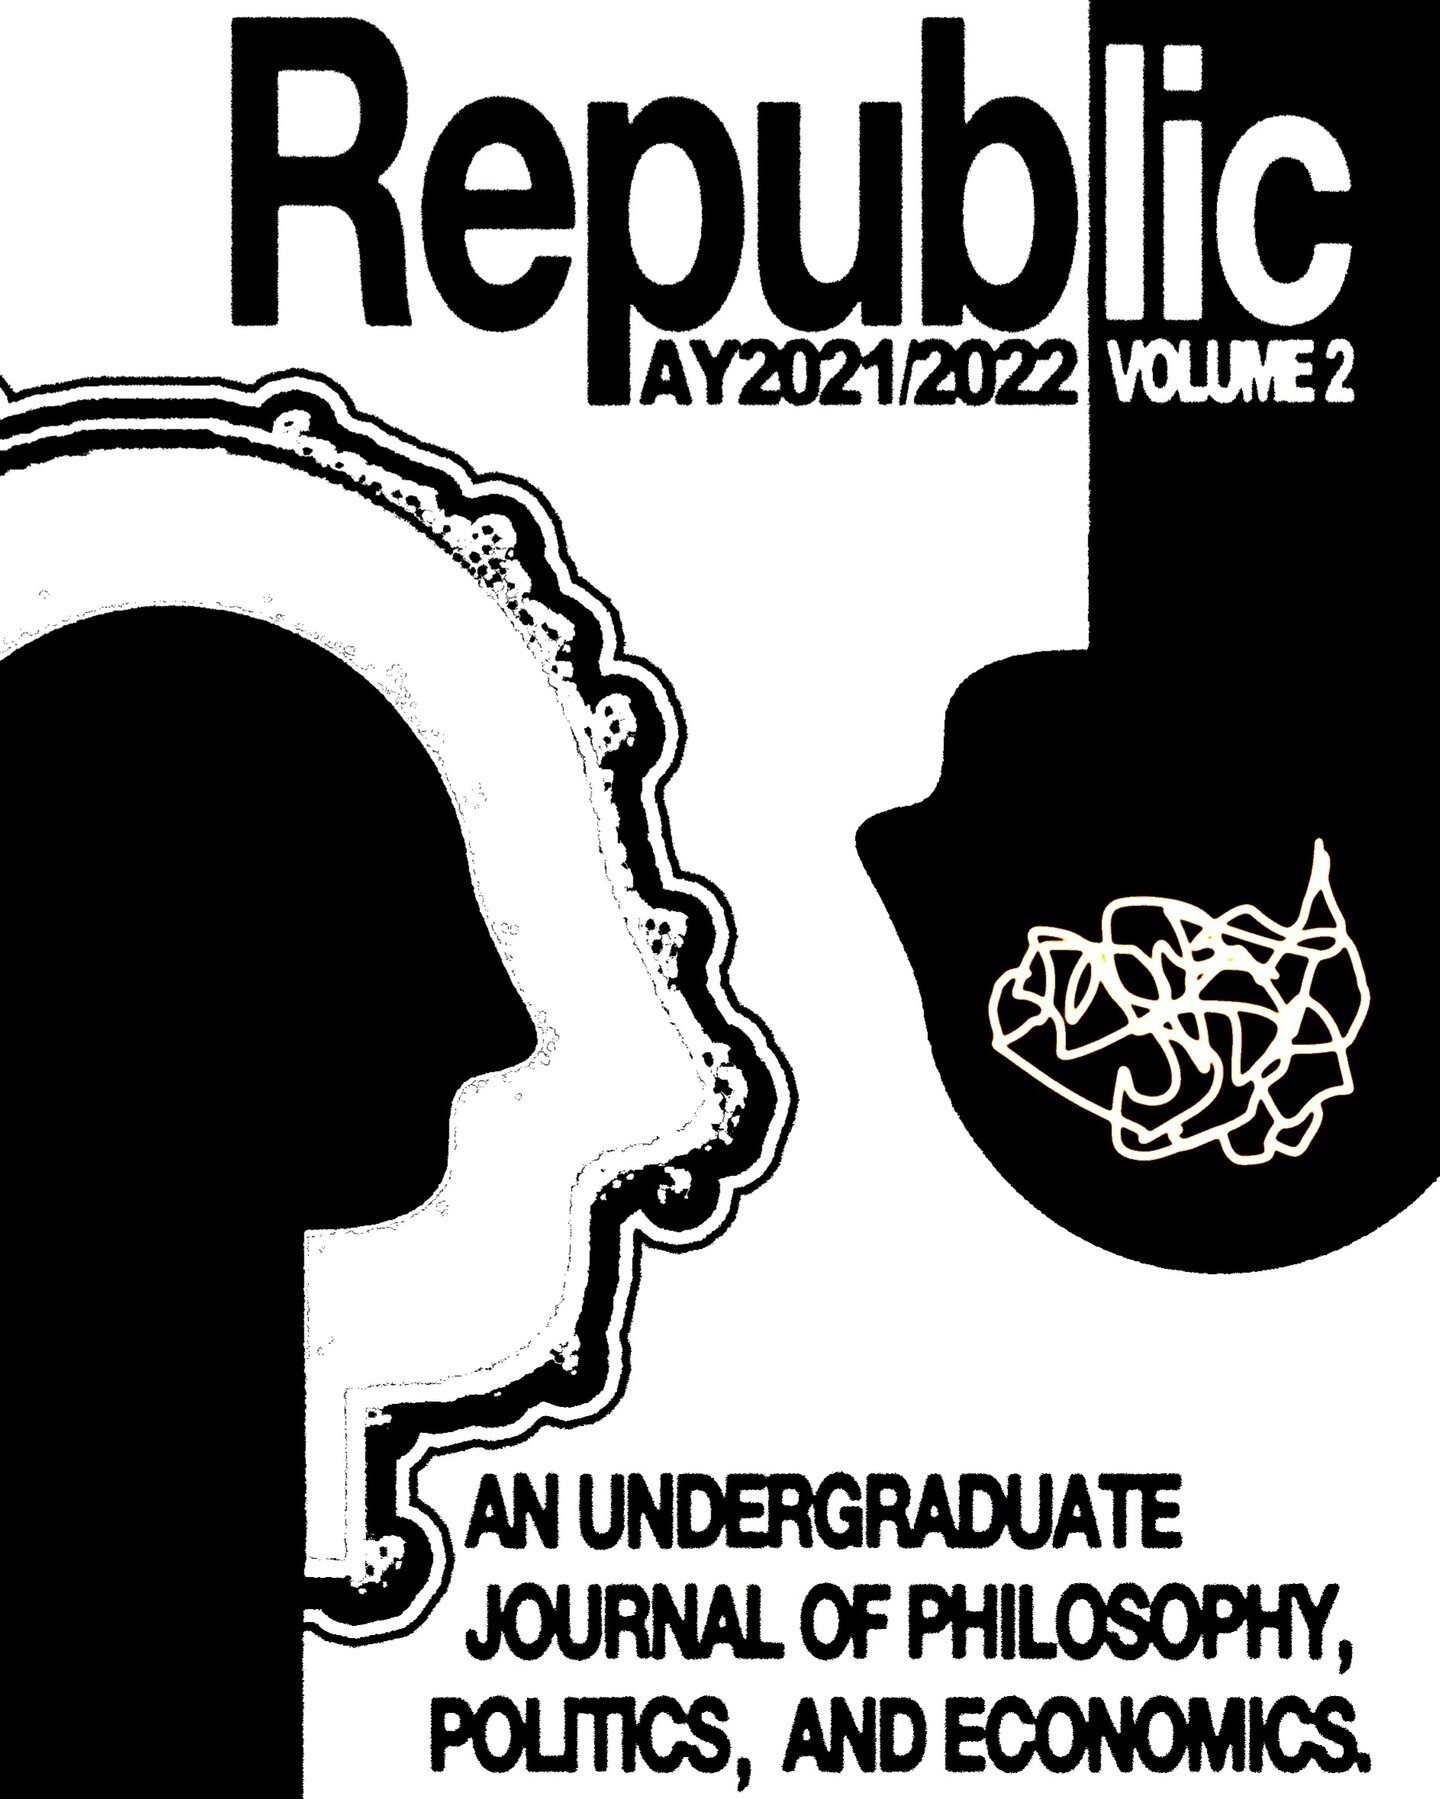 ❗️📢 Volume 2 of the Republic is now out. 

Do give our semesterly undergraduate journal of Philosophy, Politics and Economics by students from the National University of Singapore a read.📖

It can be found on our PPE club website (www.nusppeclub.sq